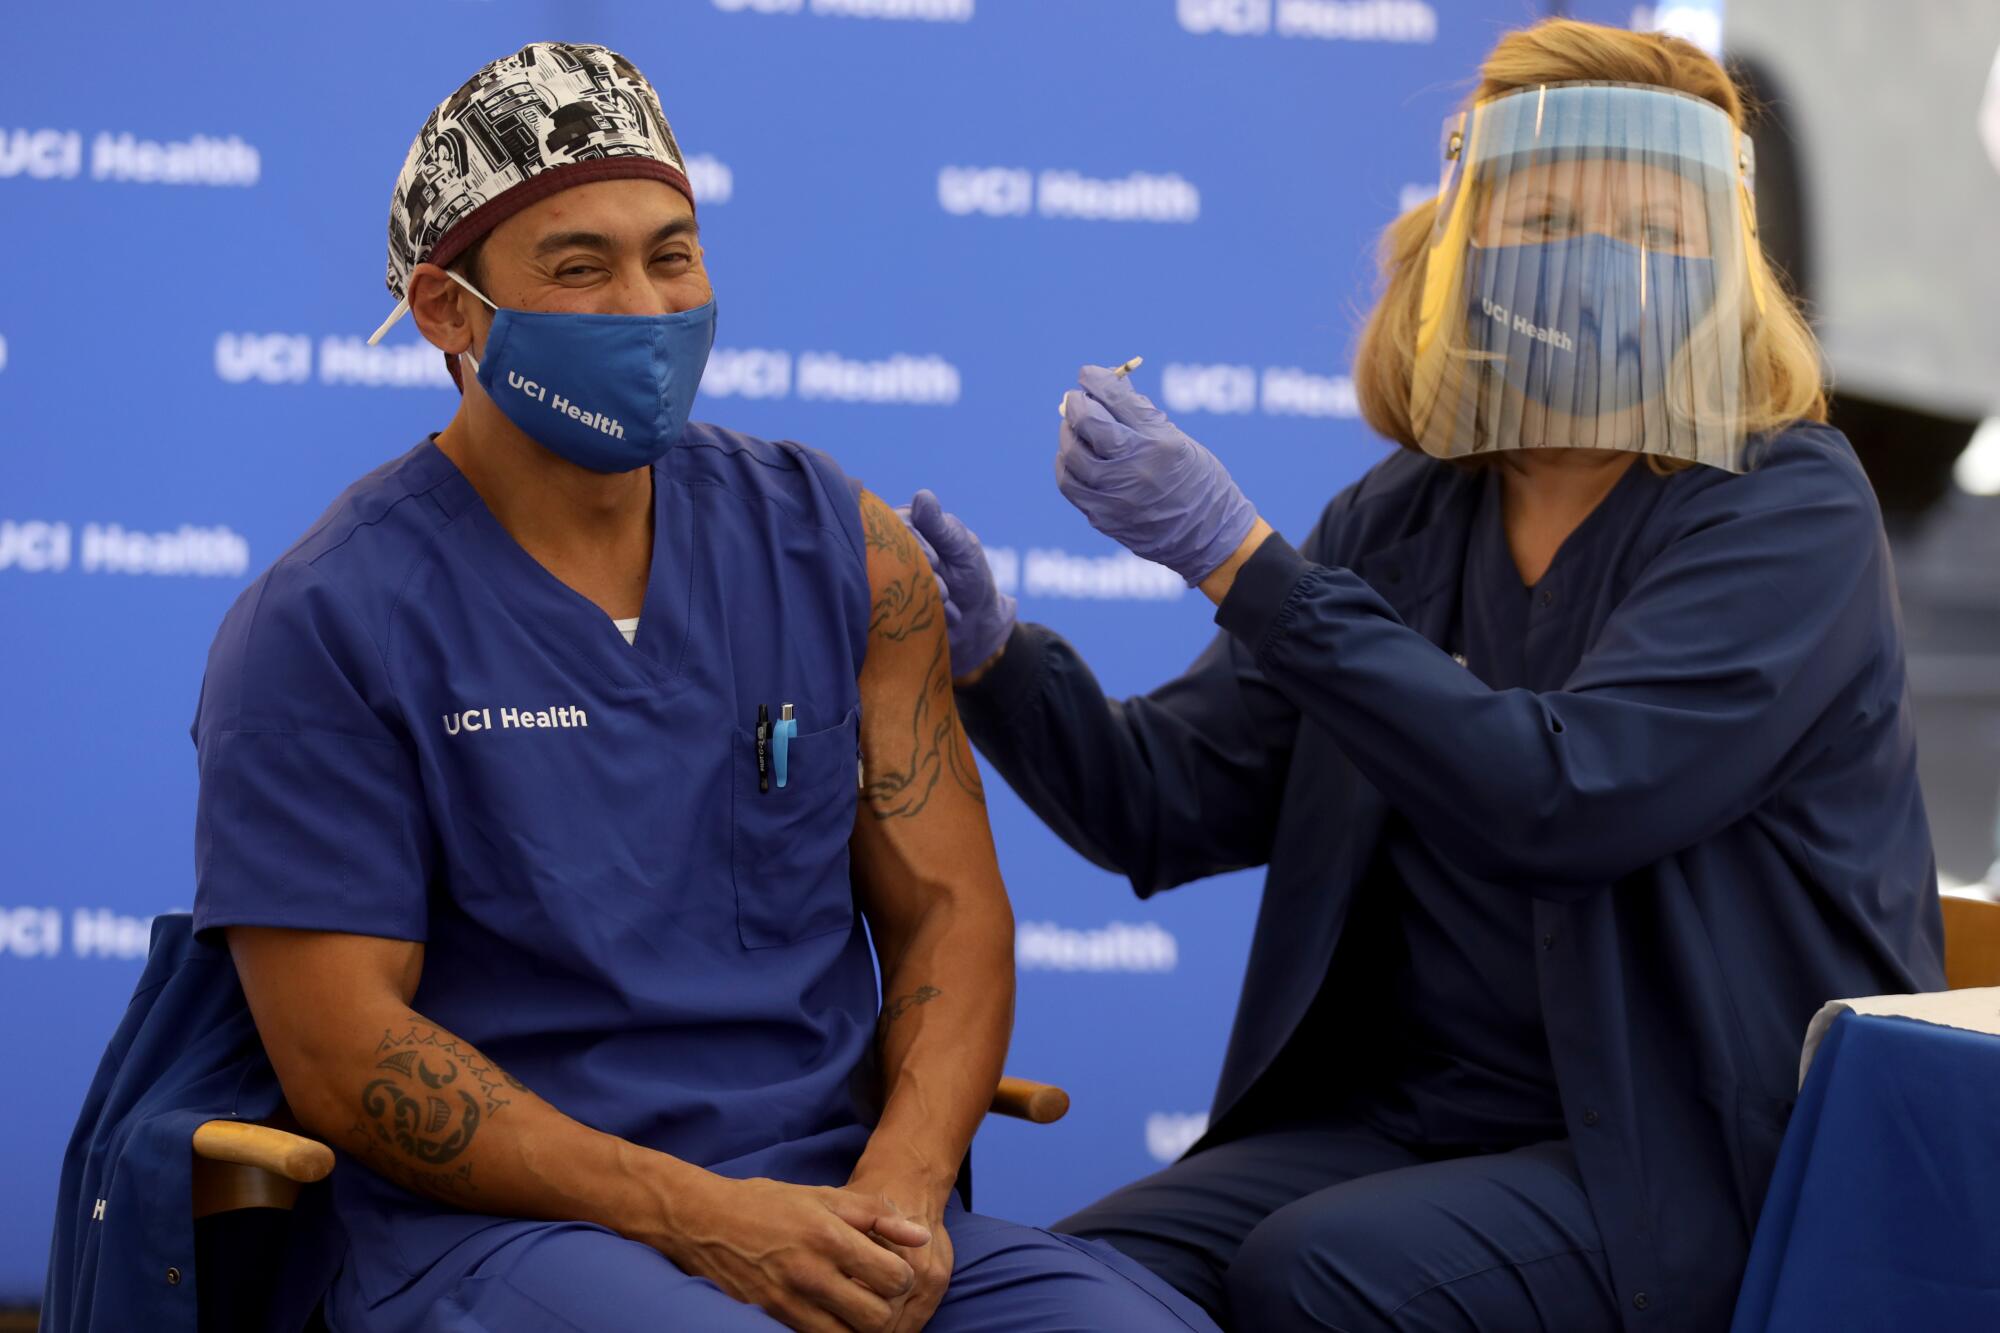 A healthcare worker dressed in scrubs receives a vaccine administered by a nurse wearing a face shield